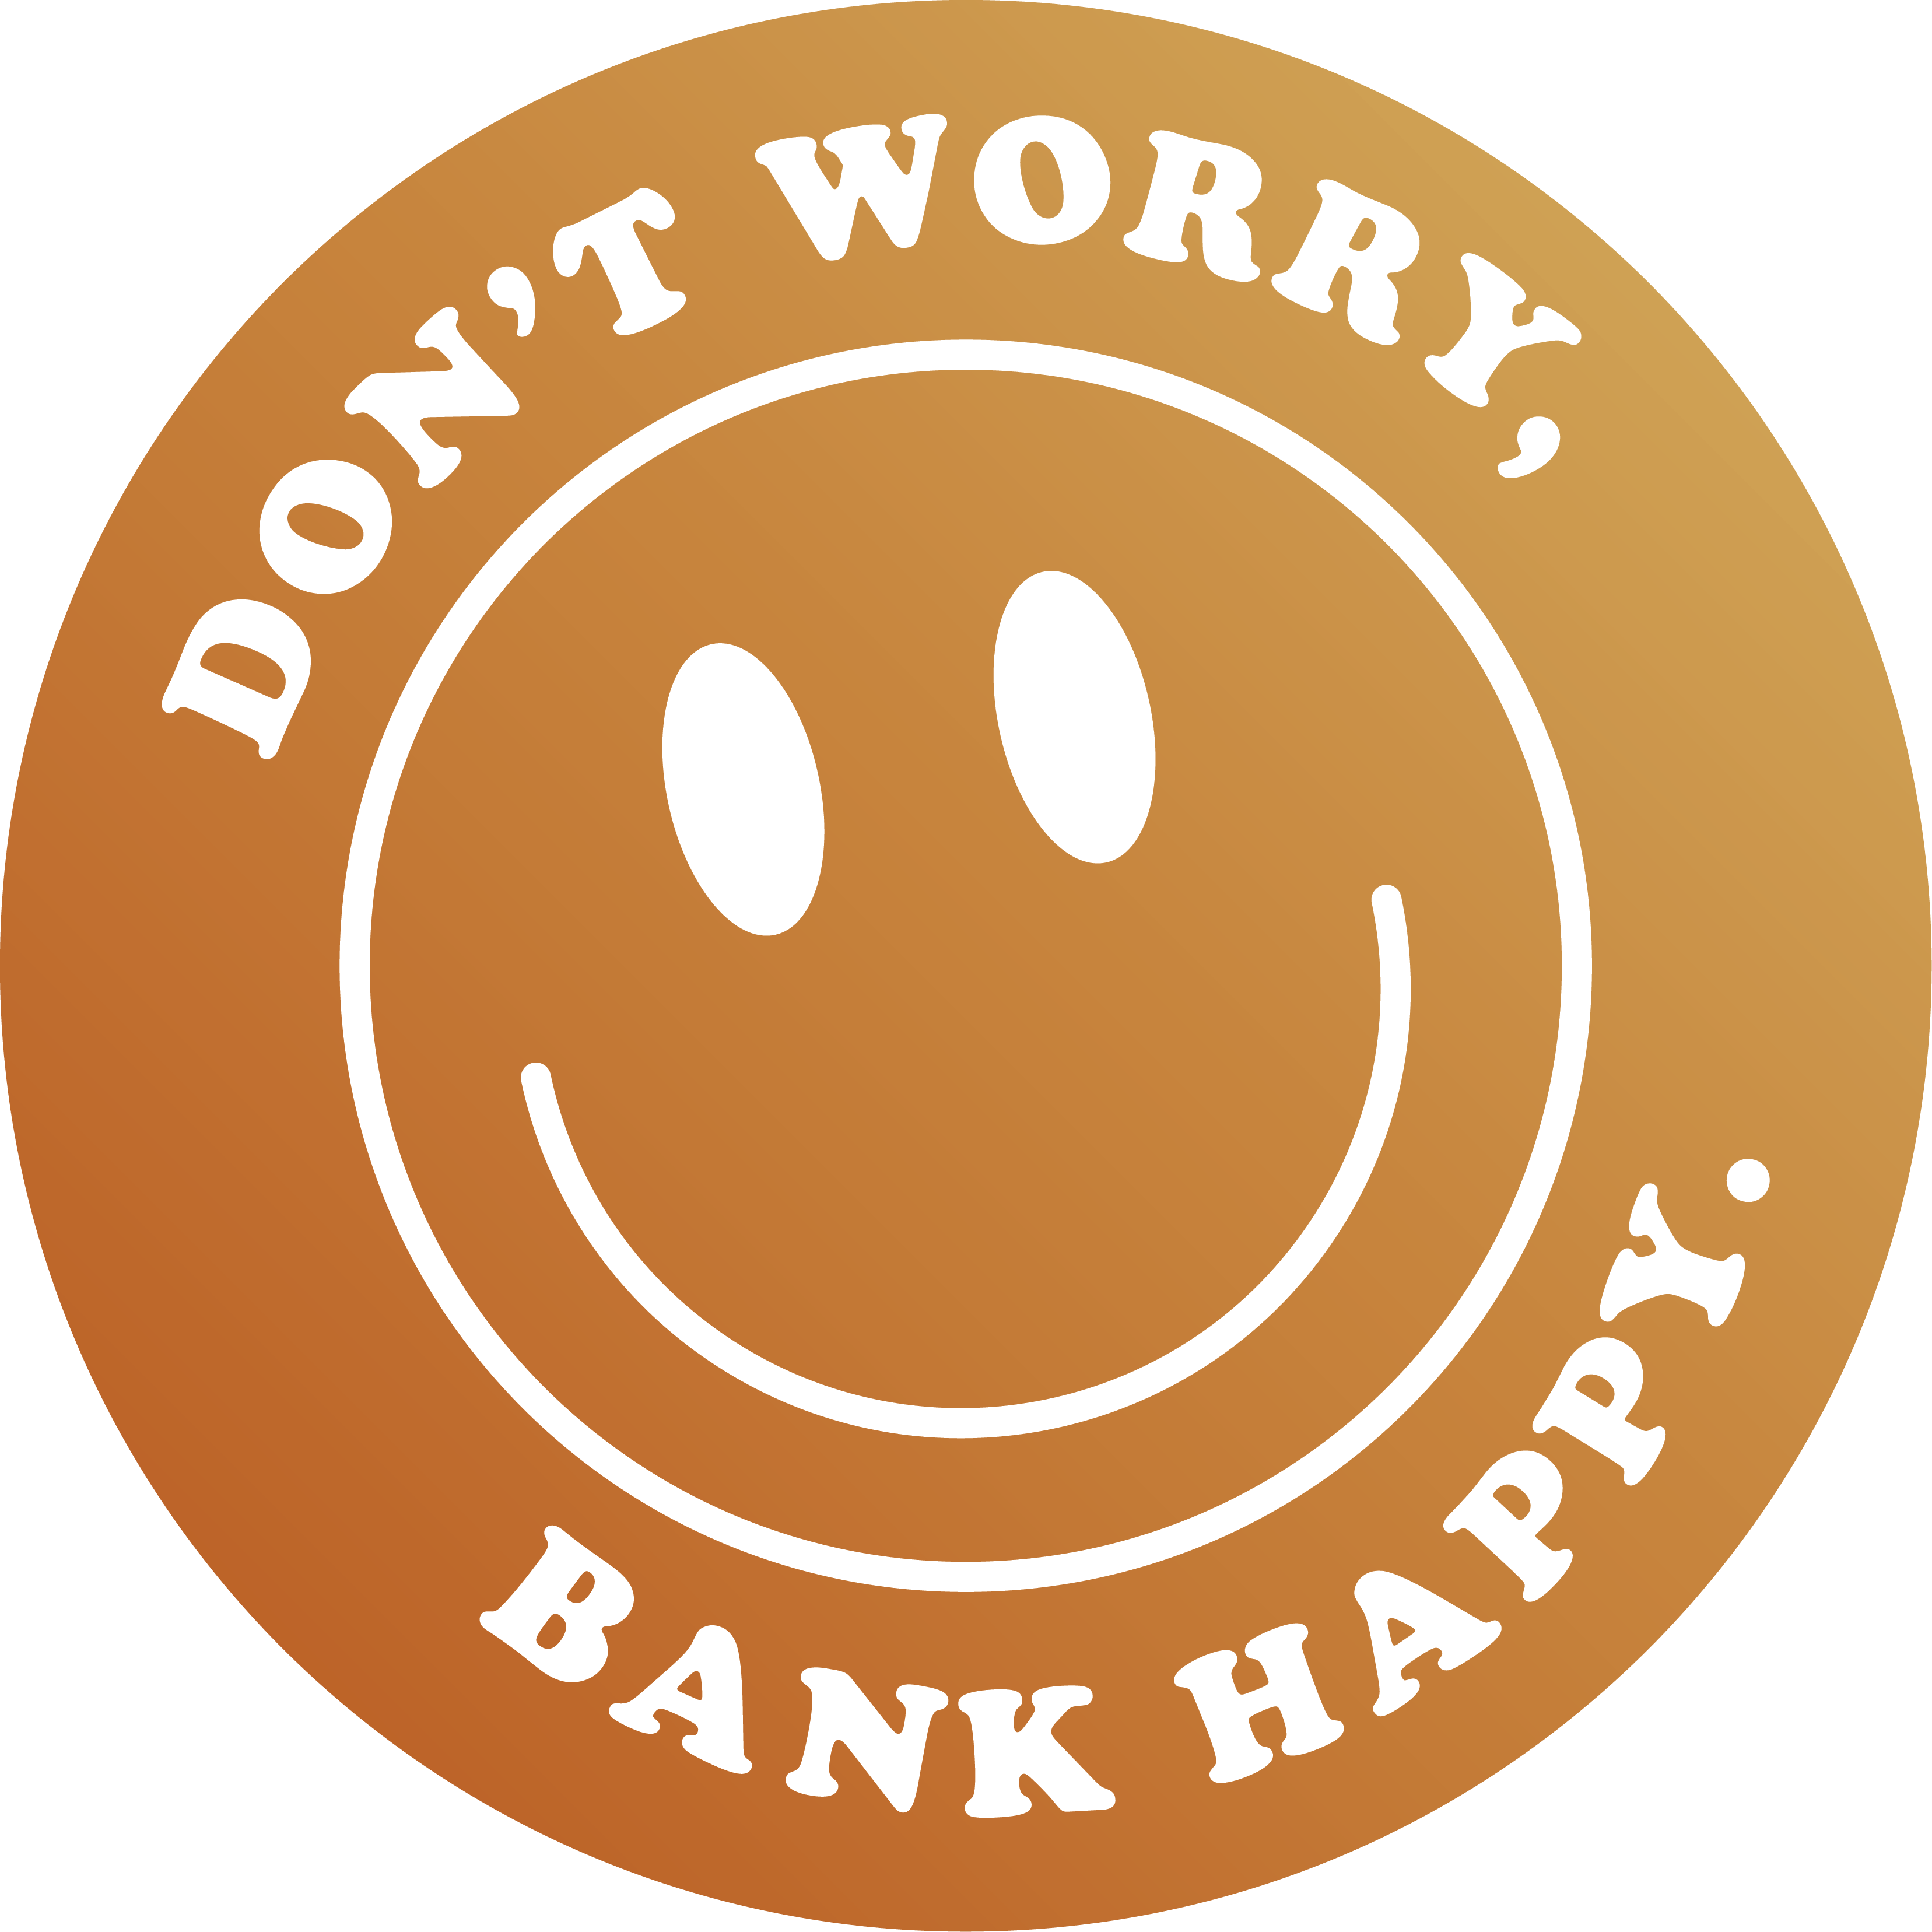 Logo for Don't Worry, Bank Happy that looks like a smiley face